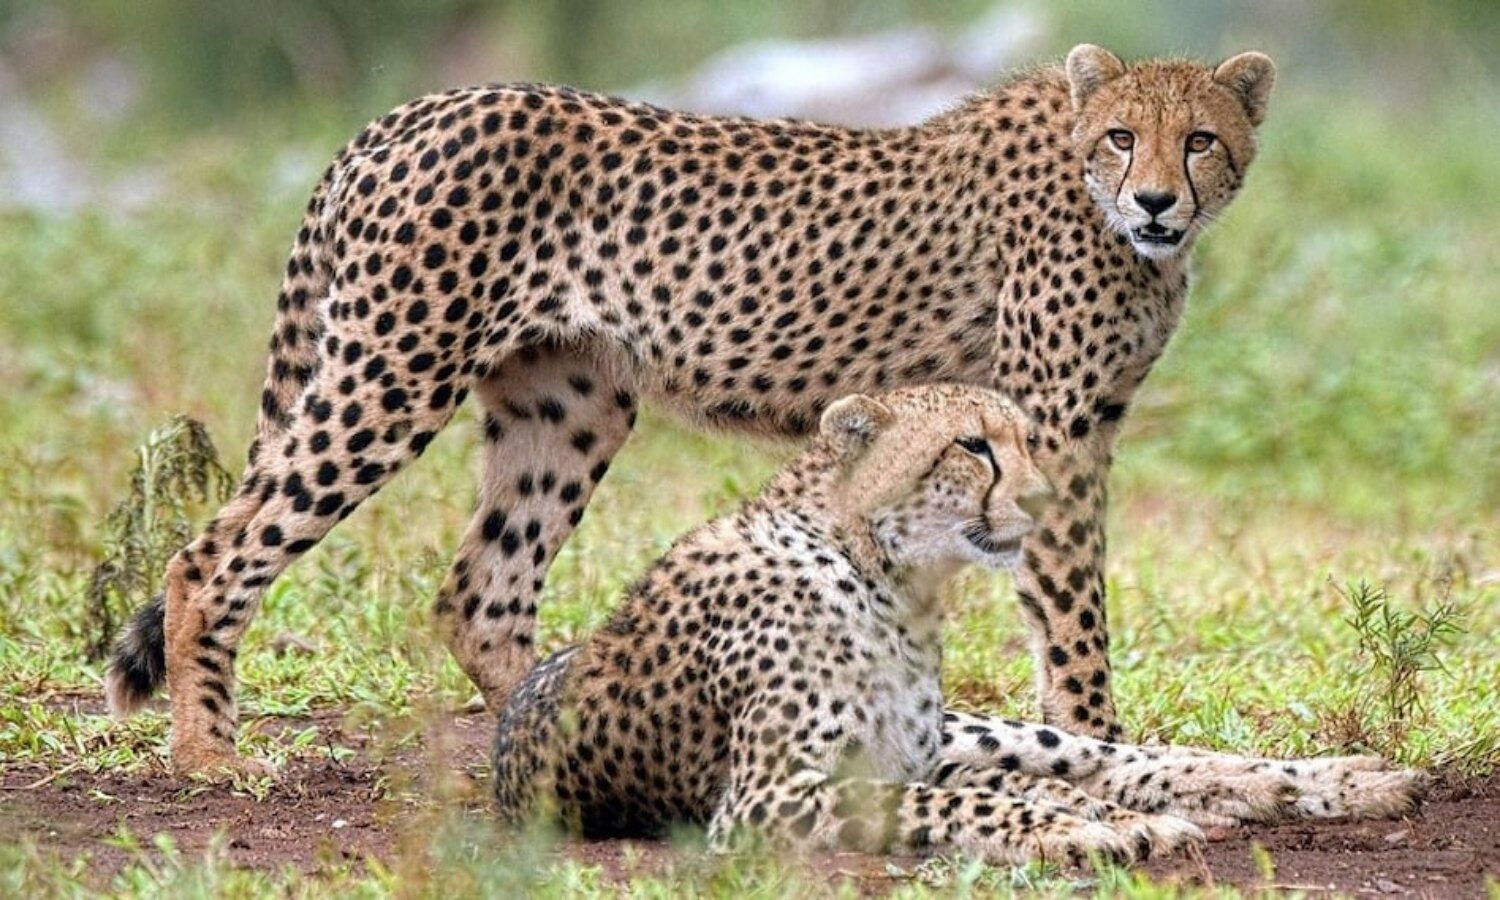 Cheetah Project: Cheetahs have arrived, now what will happen next